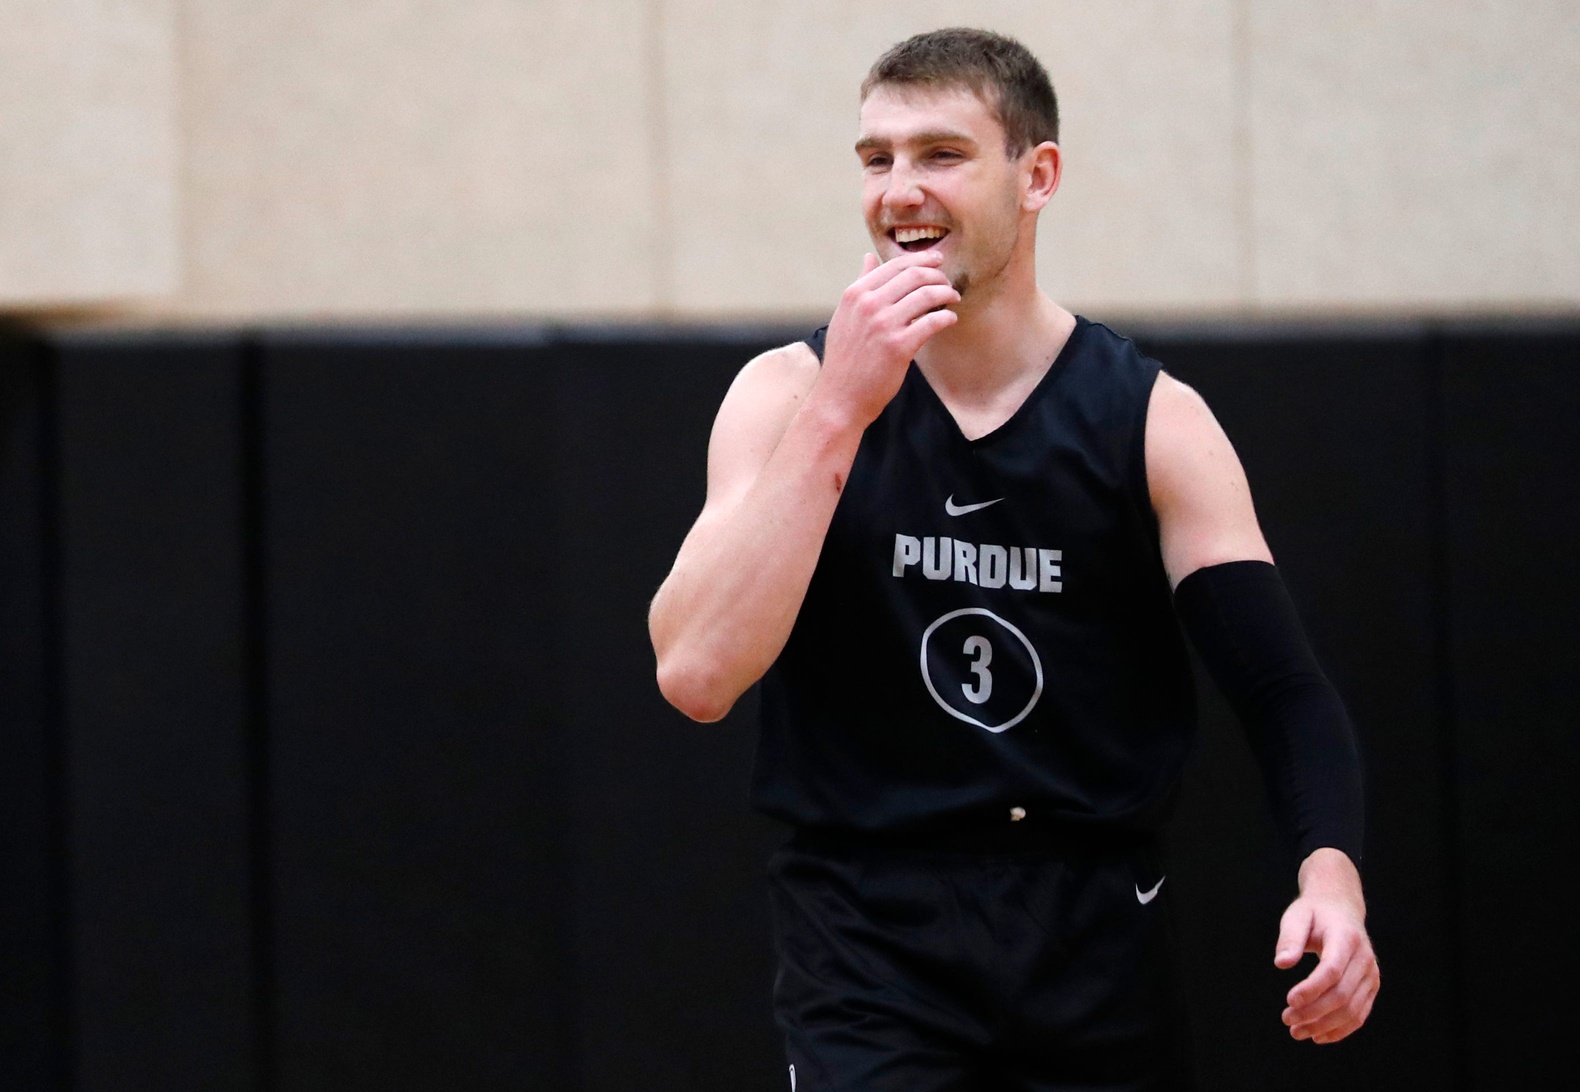 Purdue Boilermakers guard Braden Smith (3) smiles during basketball practice, Wednesday, Aug. 2, 2023, at Purdue University’s Cardinal Court in West Lafayette, Ind.